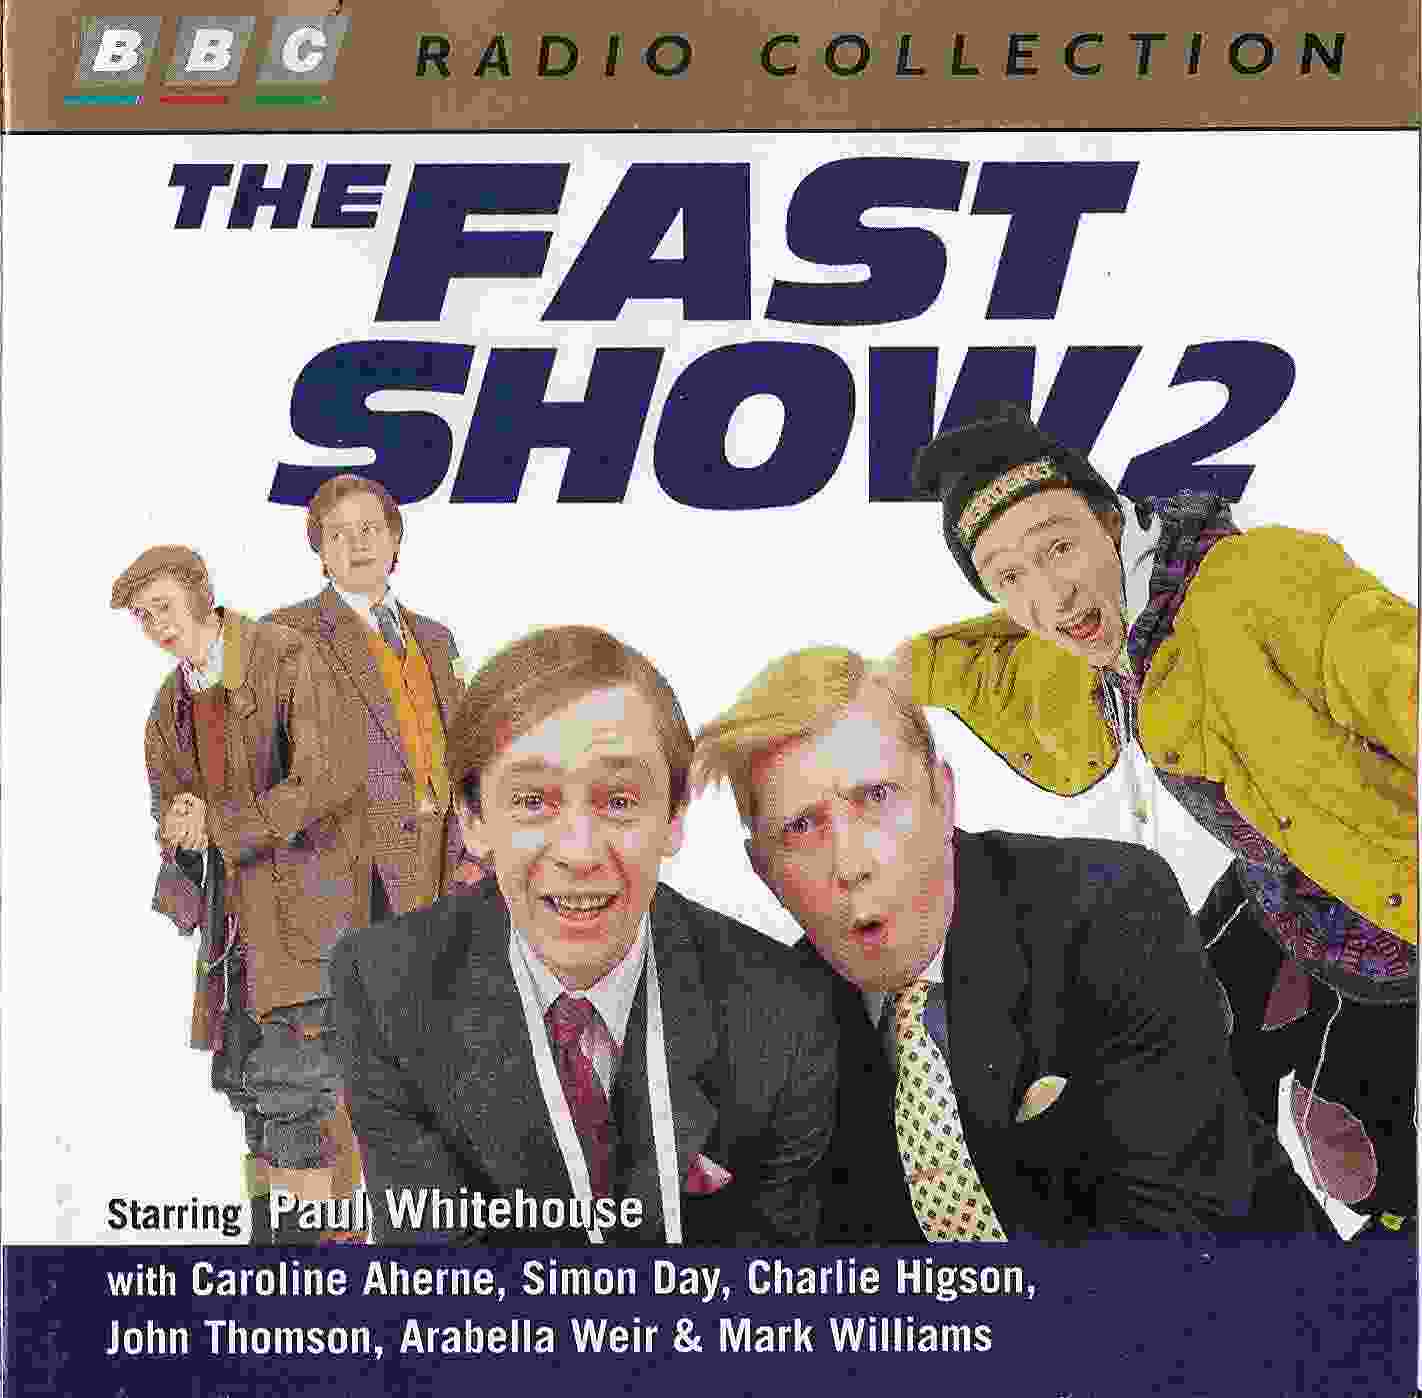 Picture of ZBBC 2011 CD The fast show - Volume 2 by artist Paul Whitehouse / Charlie Higson from the BBC cds - Records and Tapes library